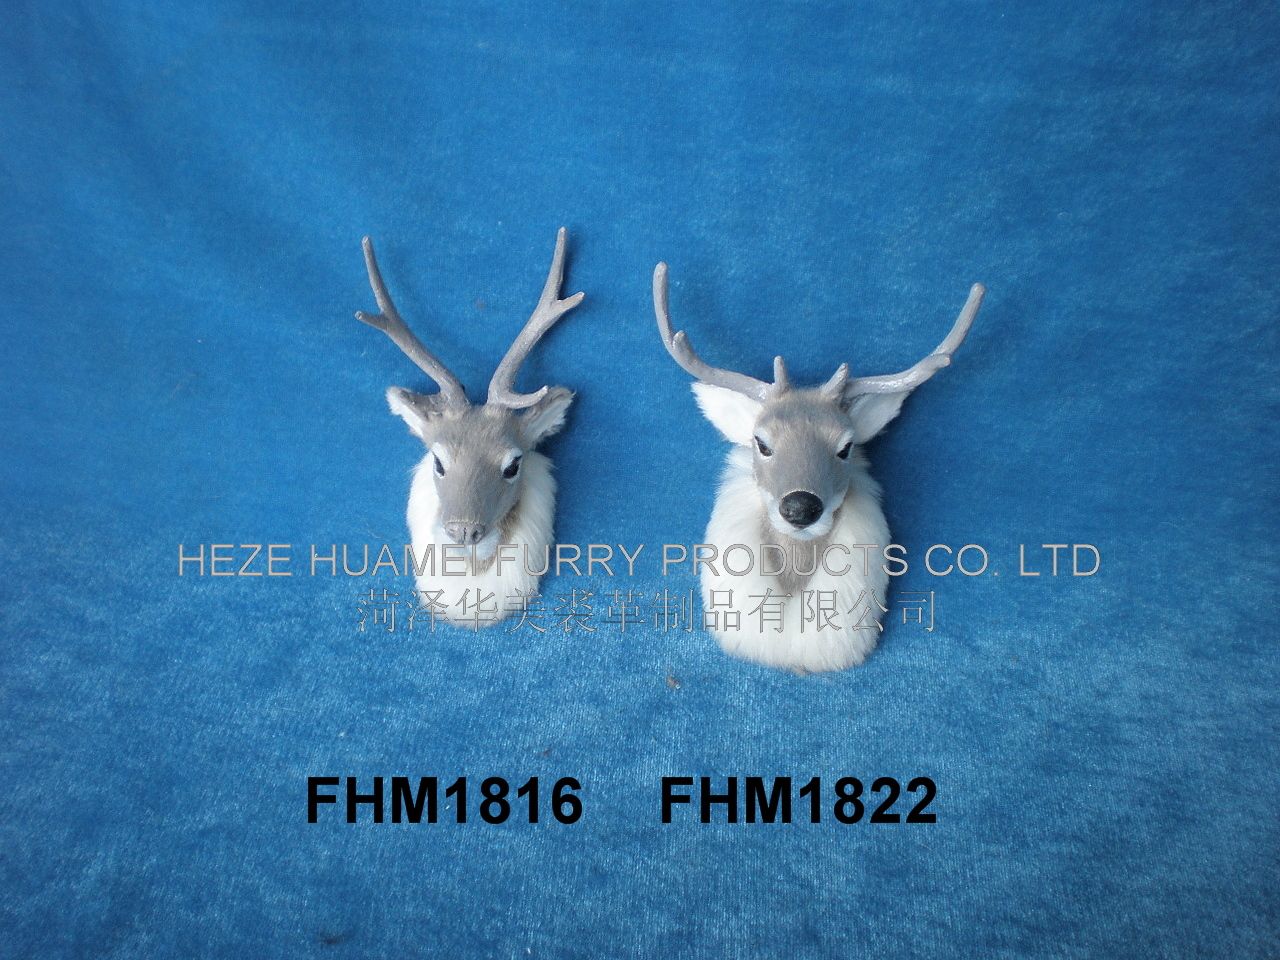 FHM1822,HEZE YUHANG FURRY PRODUCTS CO., LTD.